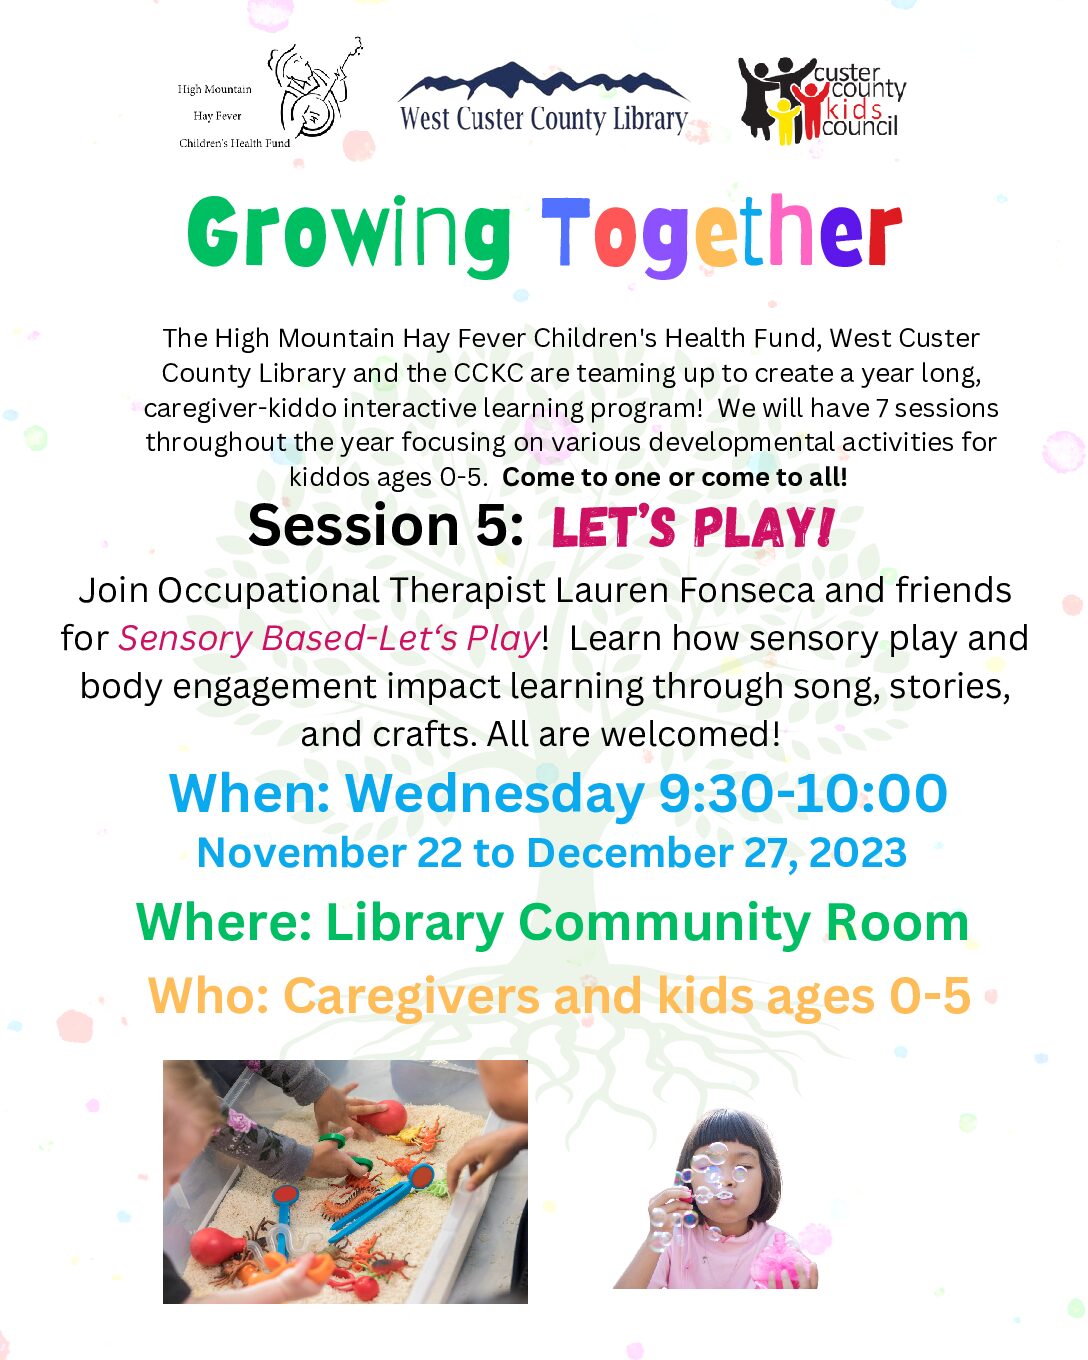 Growing Together - Let's Play!